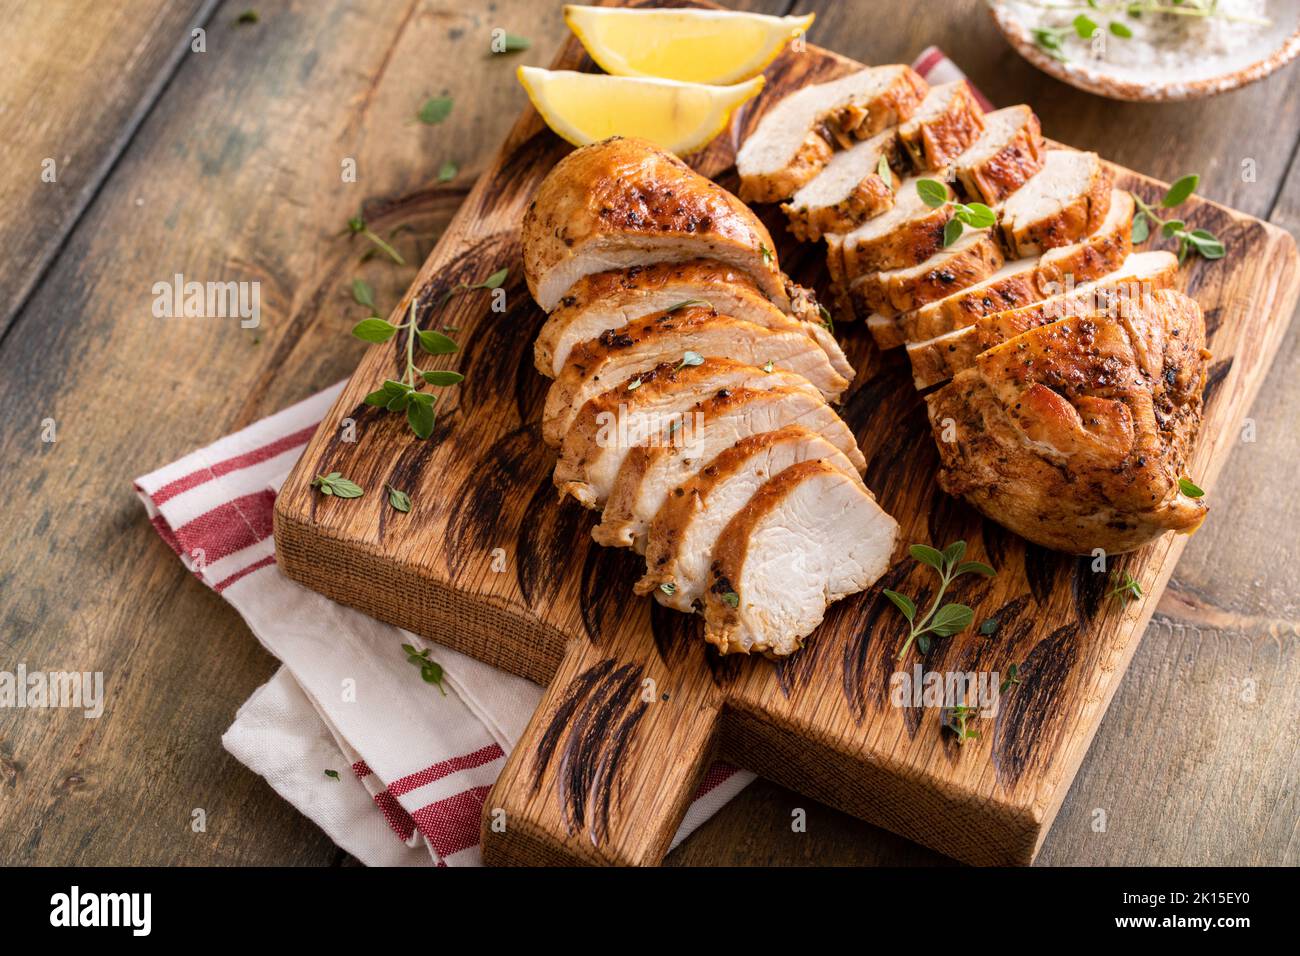 Roasted or seared chicken breast with herbs Stock Photo